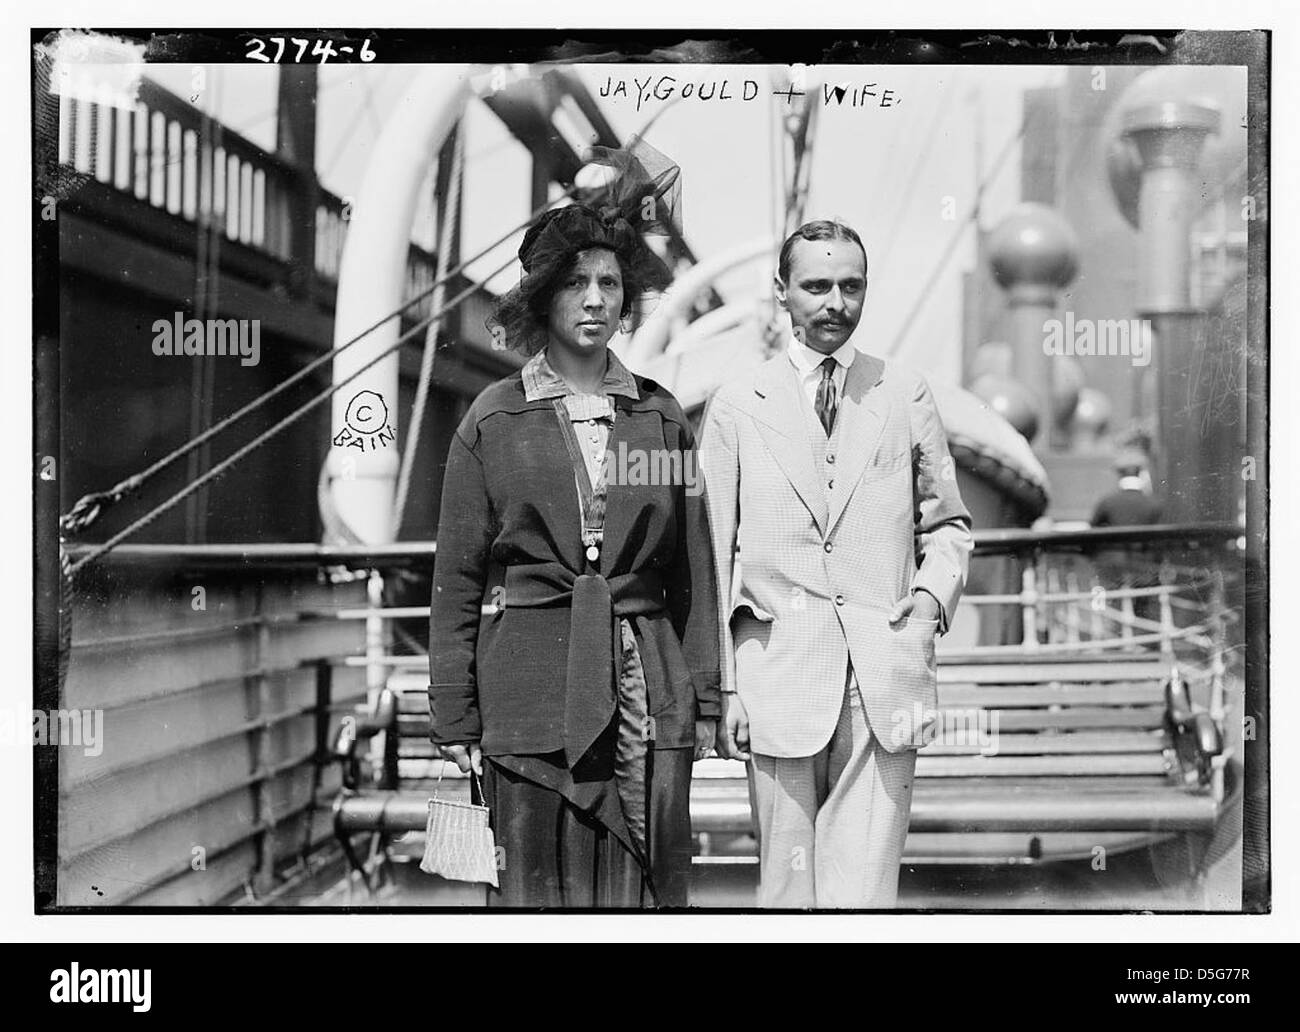 Jay Gould & wife (LOC) Stock Photo